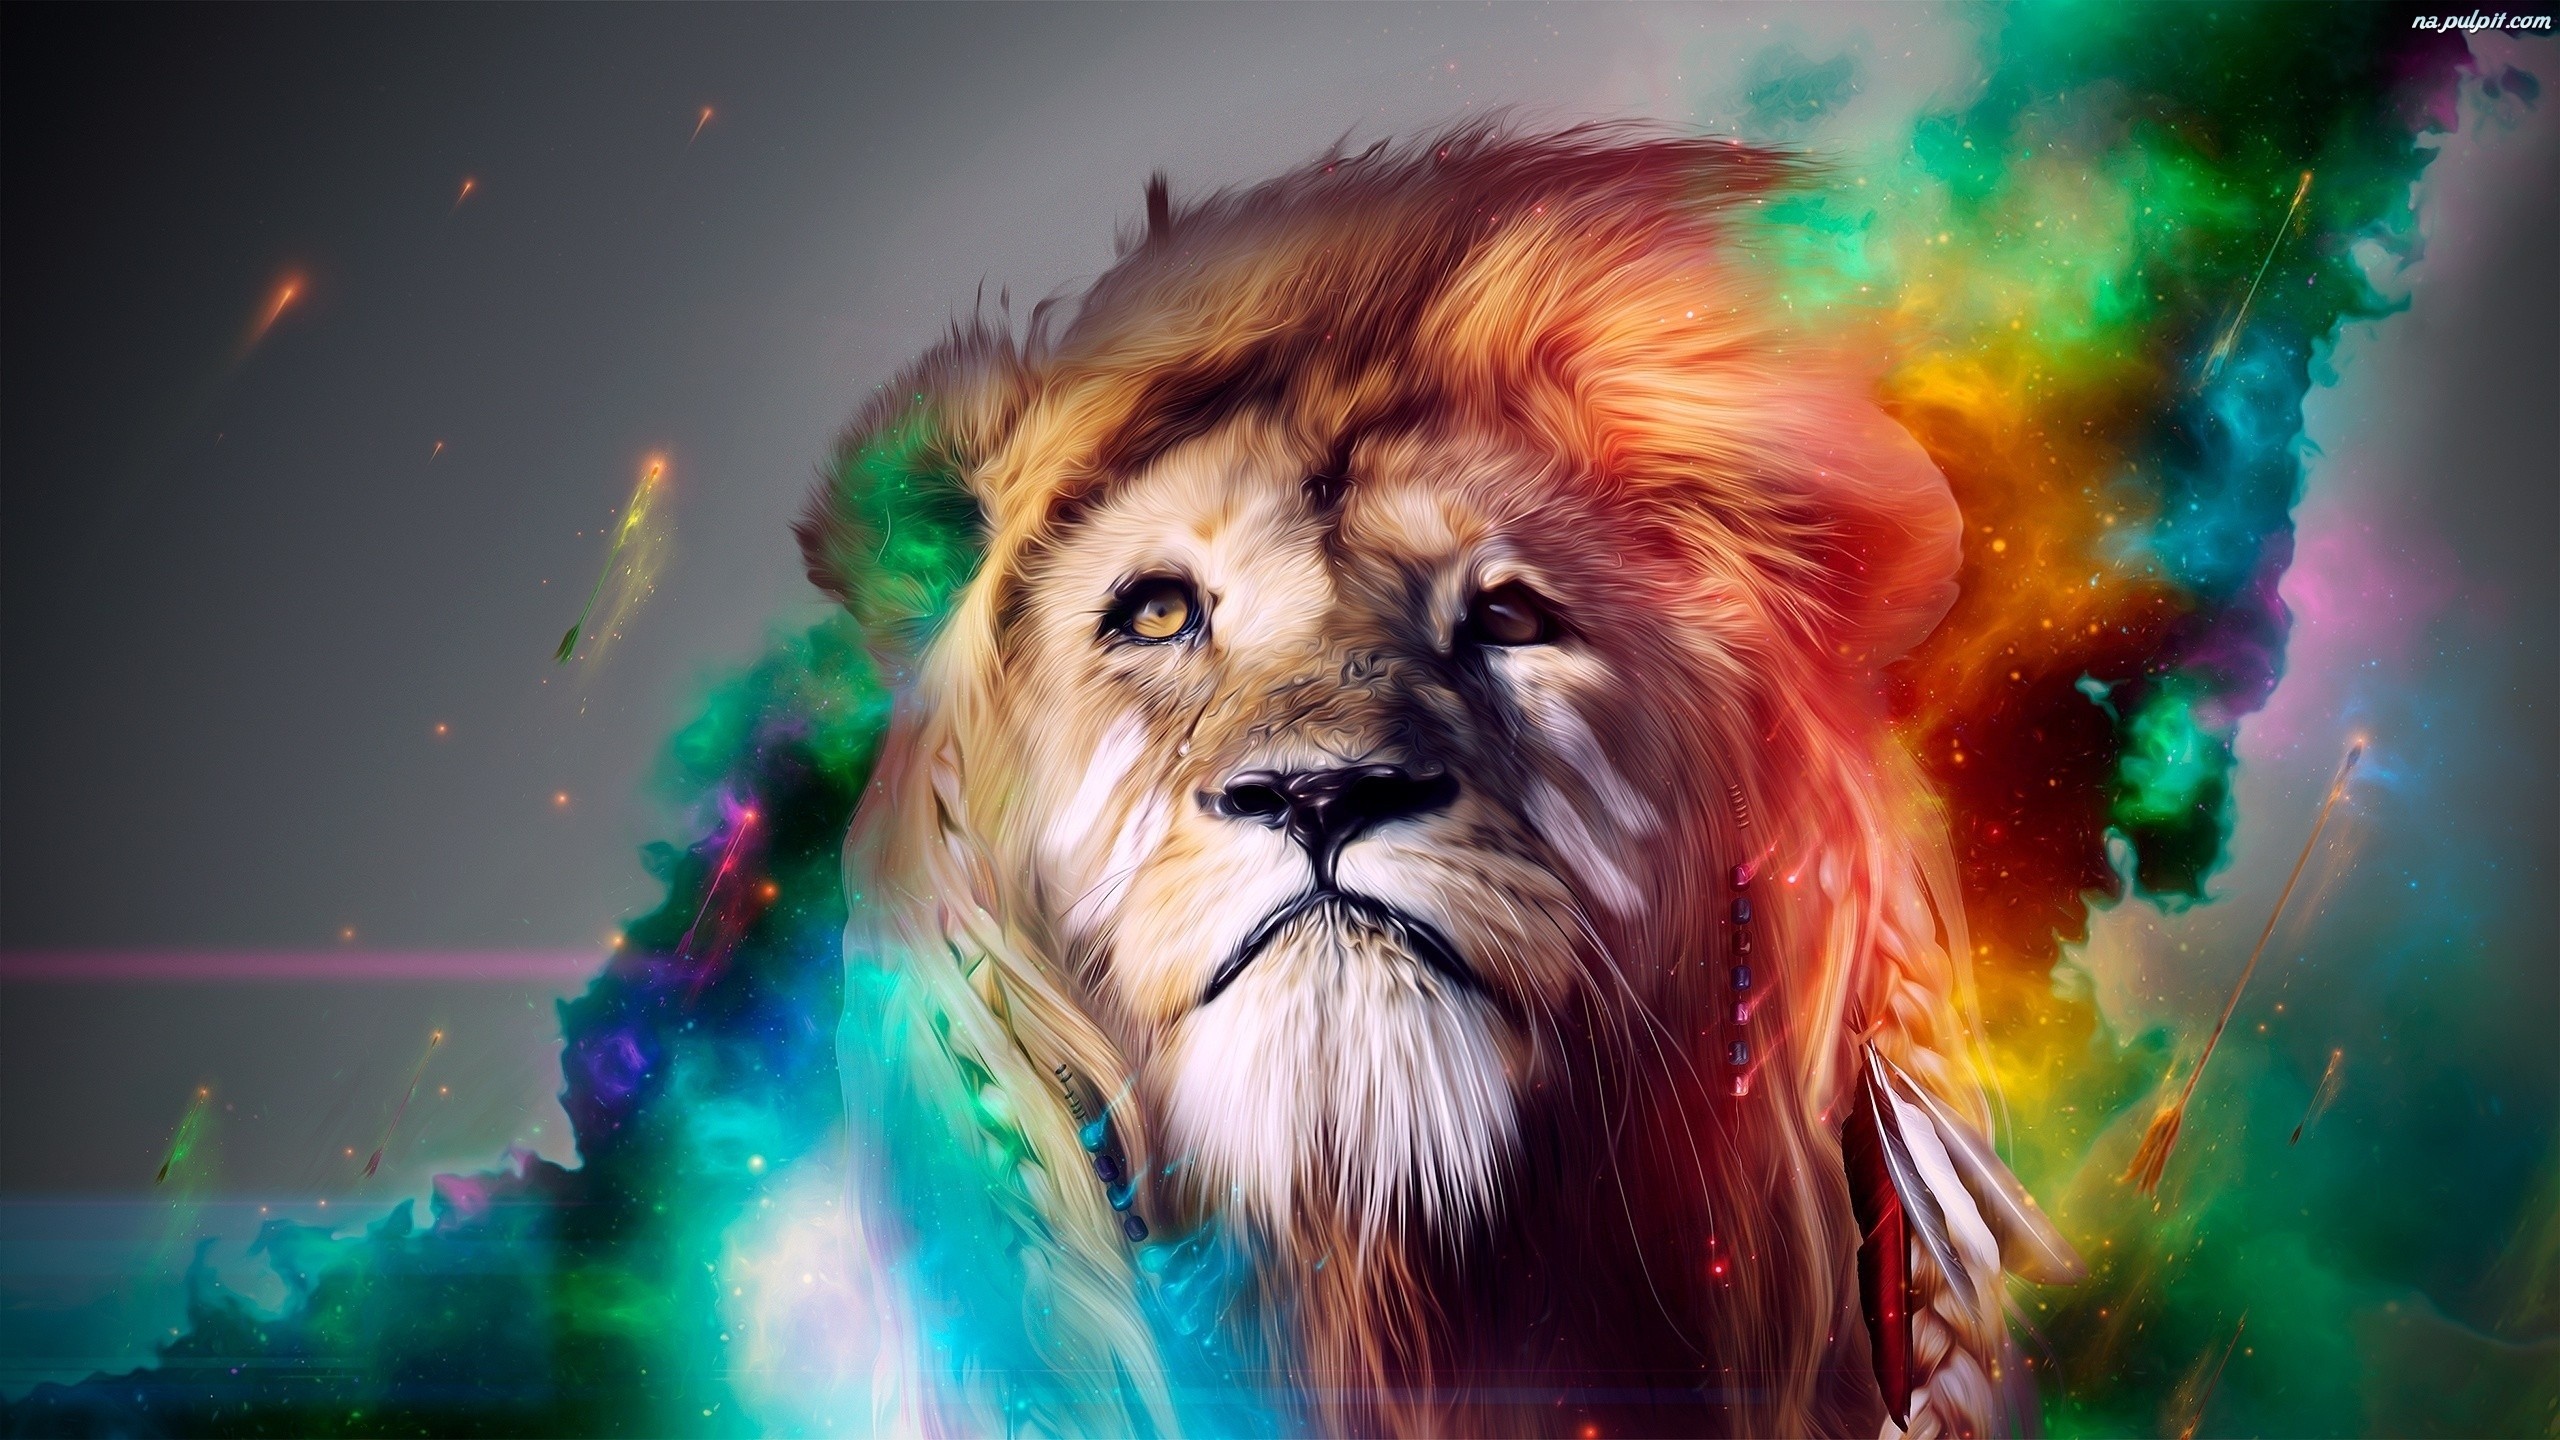 2560x1440 A colorful lion. I found this image really attractive and powerful. Its  shows the vivid colors and the face of the lion in the perfect spot.